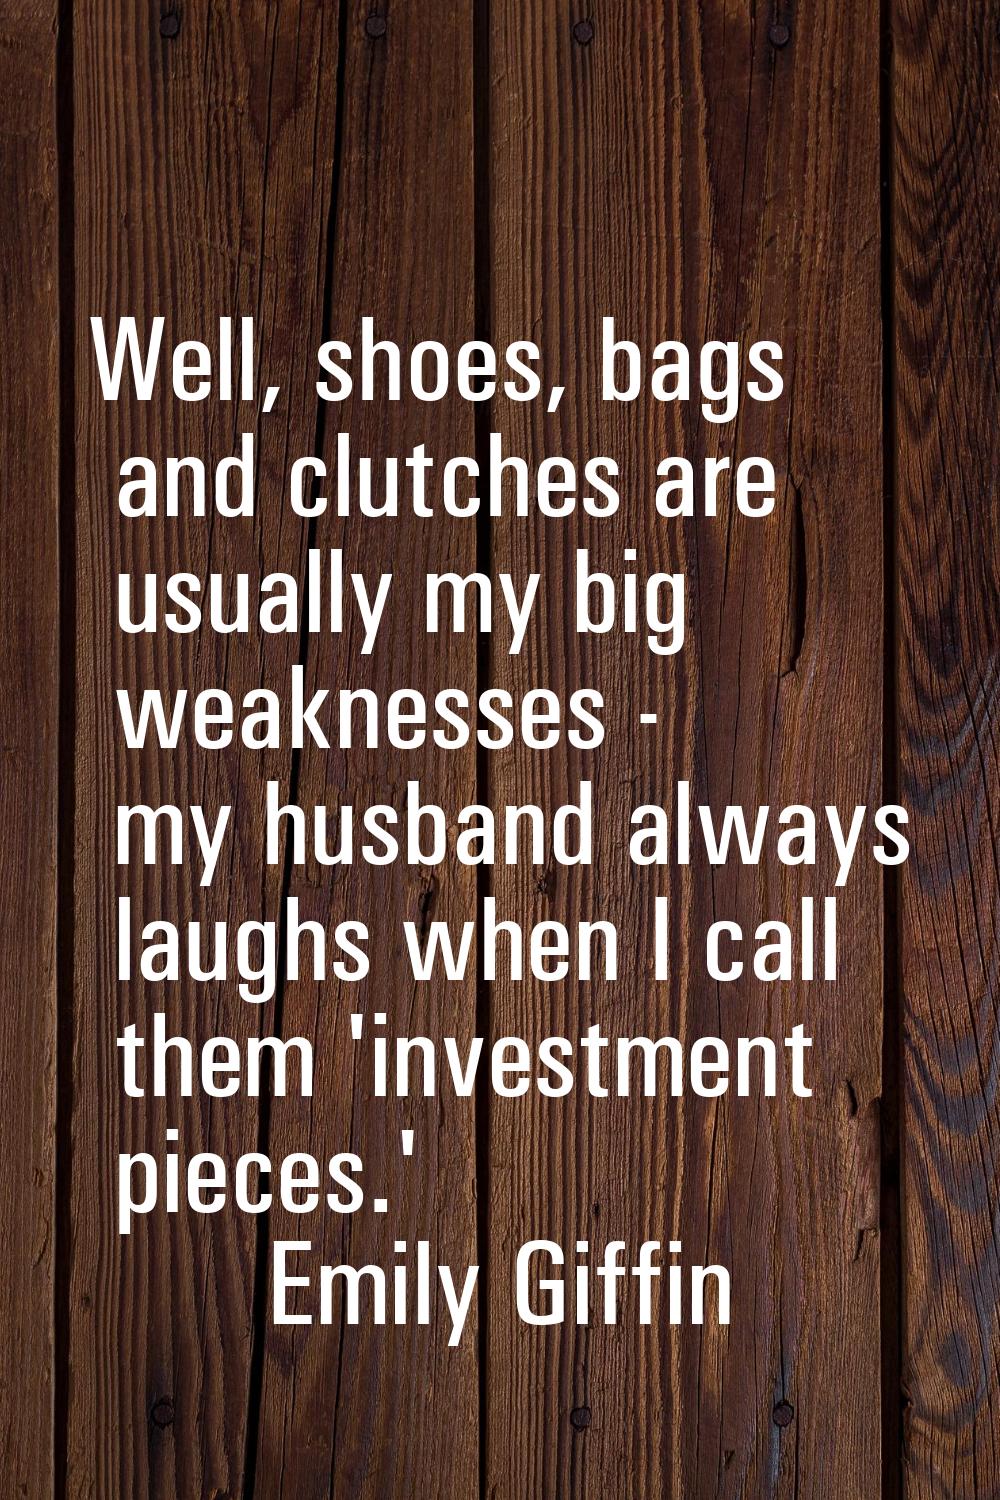 Well, shoes, bags and clutches are usually my big weaknesses - my husband always laughs when I call